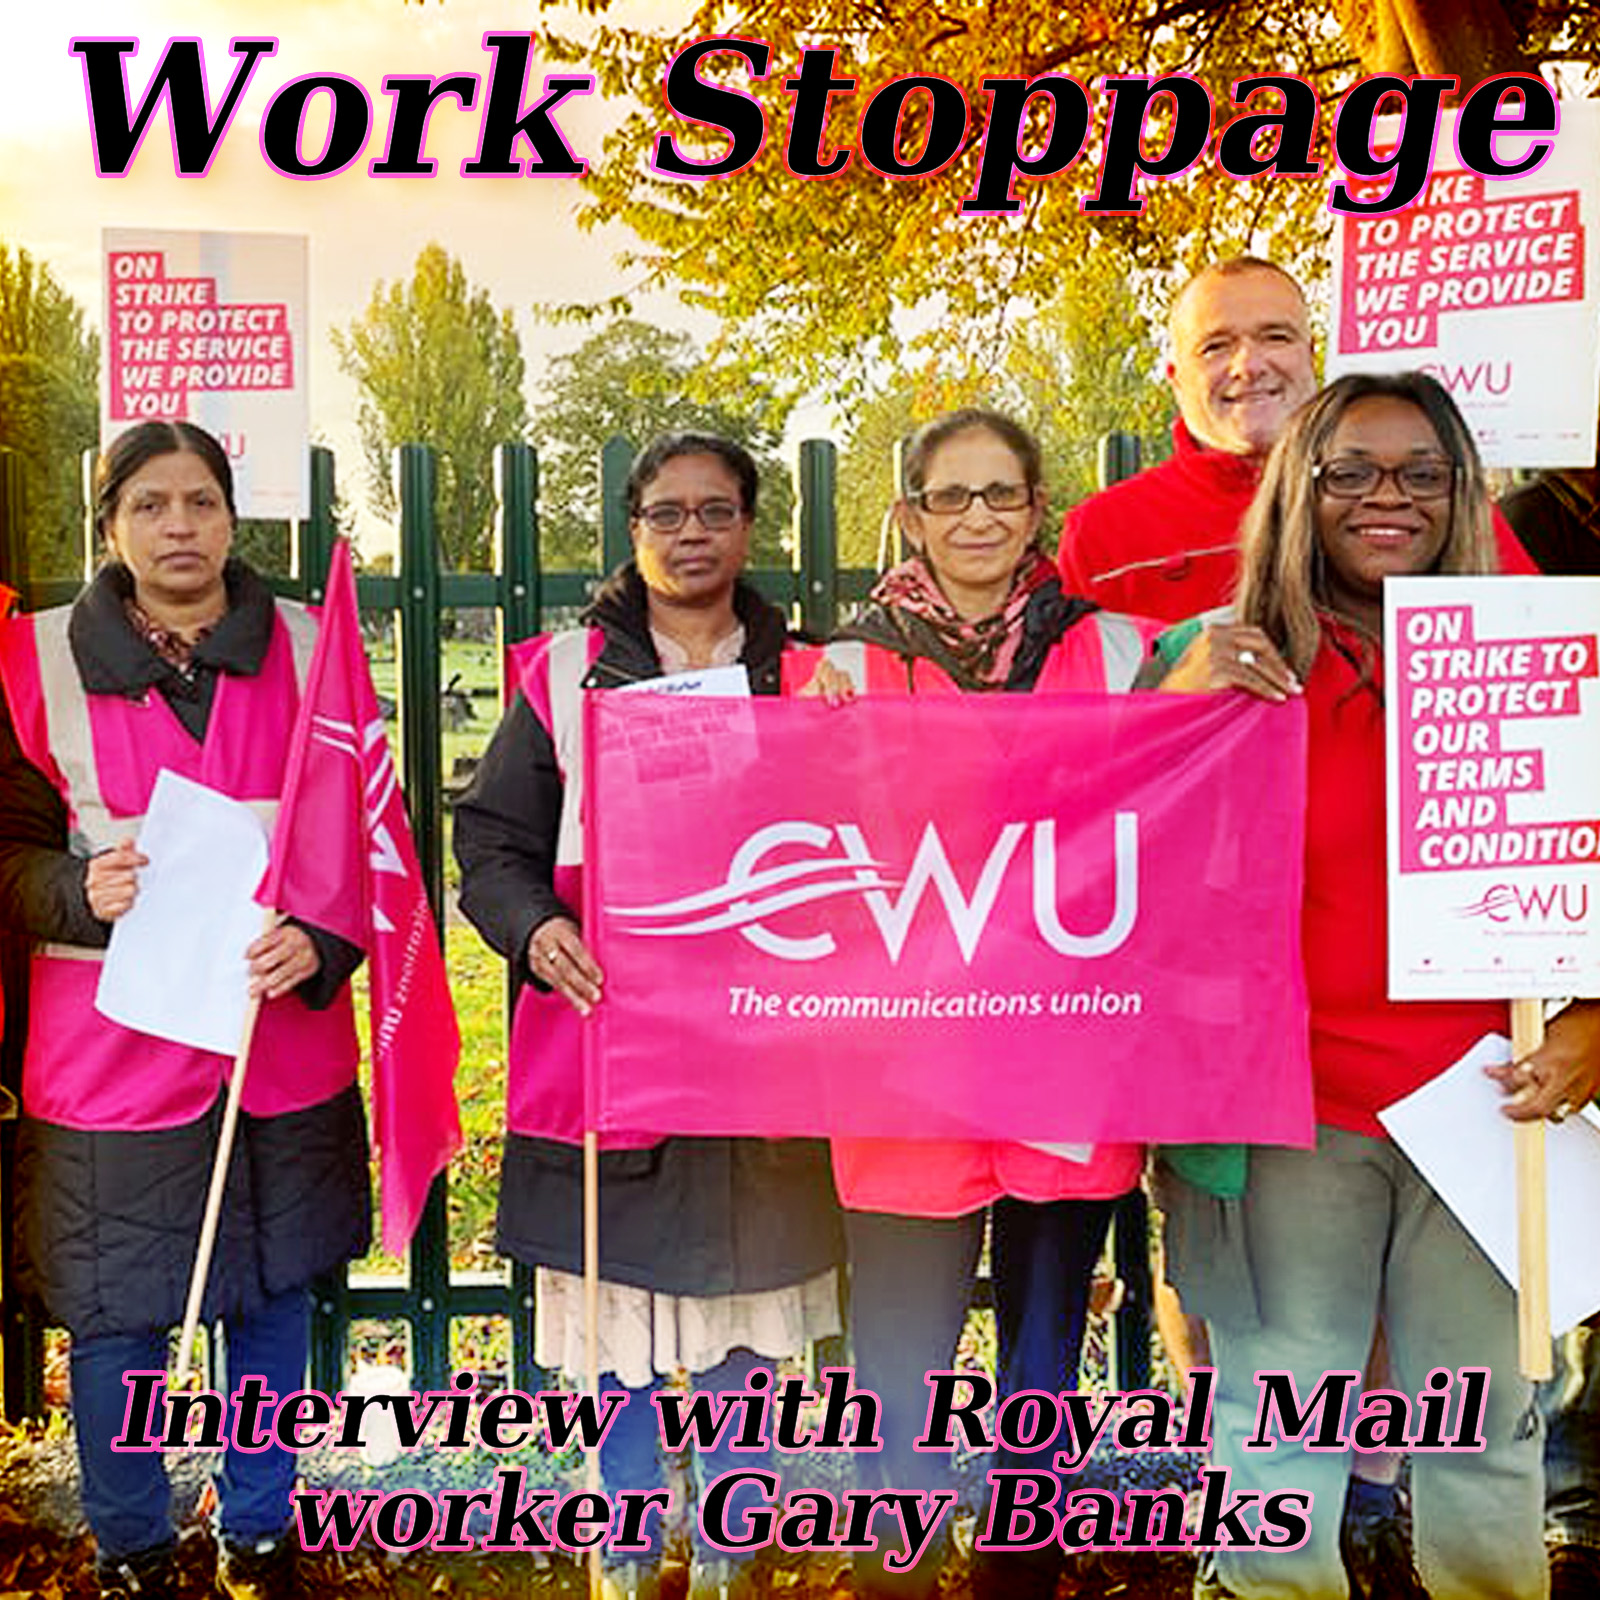 PREVIEW: Royal Mail Strike Interview